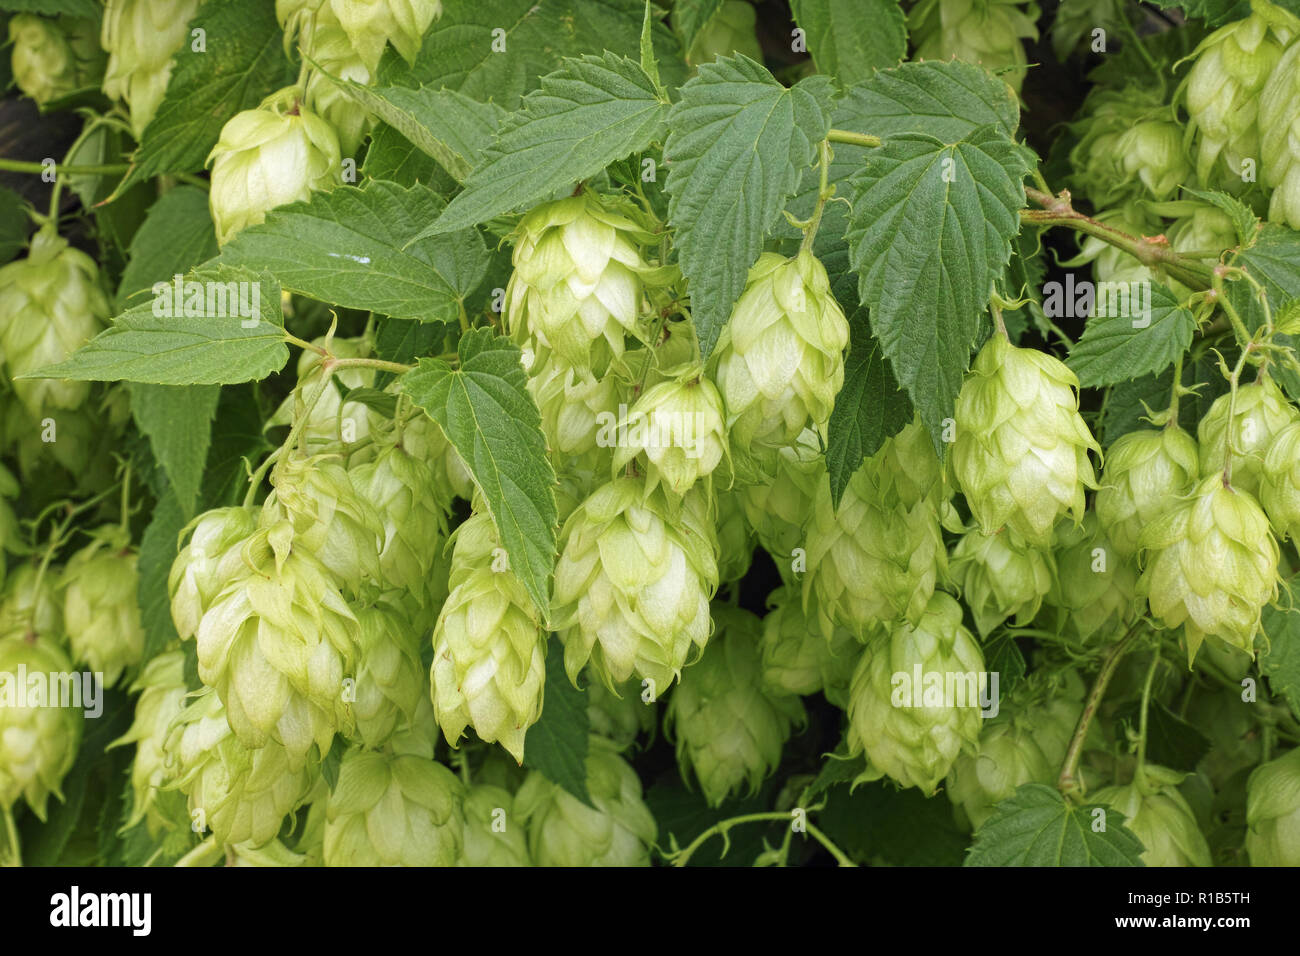 flowers and leaves of common hop plant Stock Photo